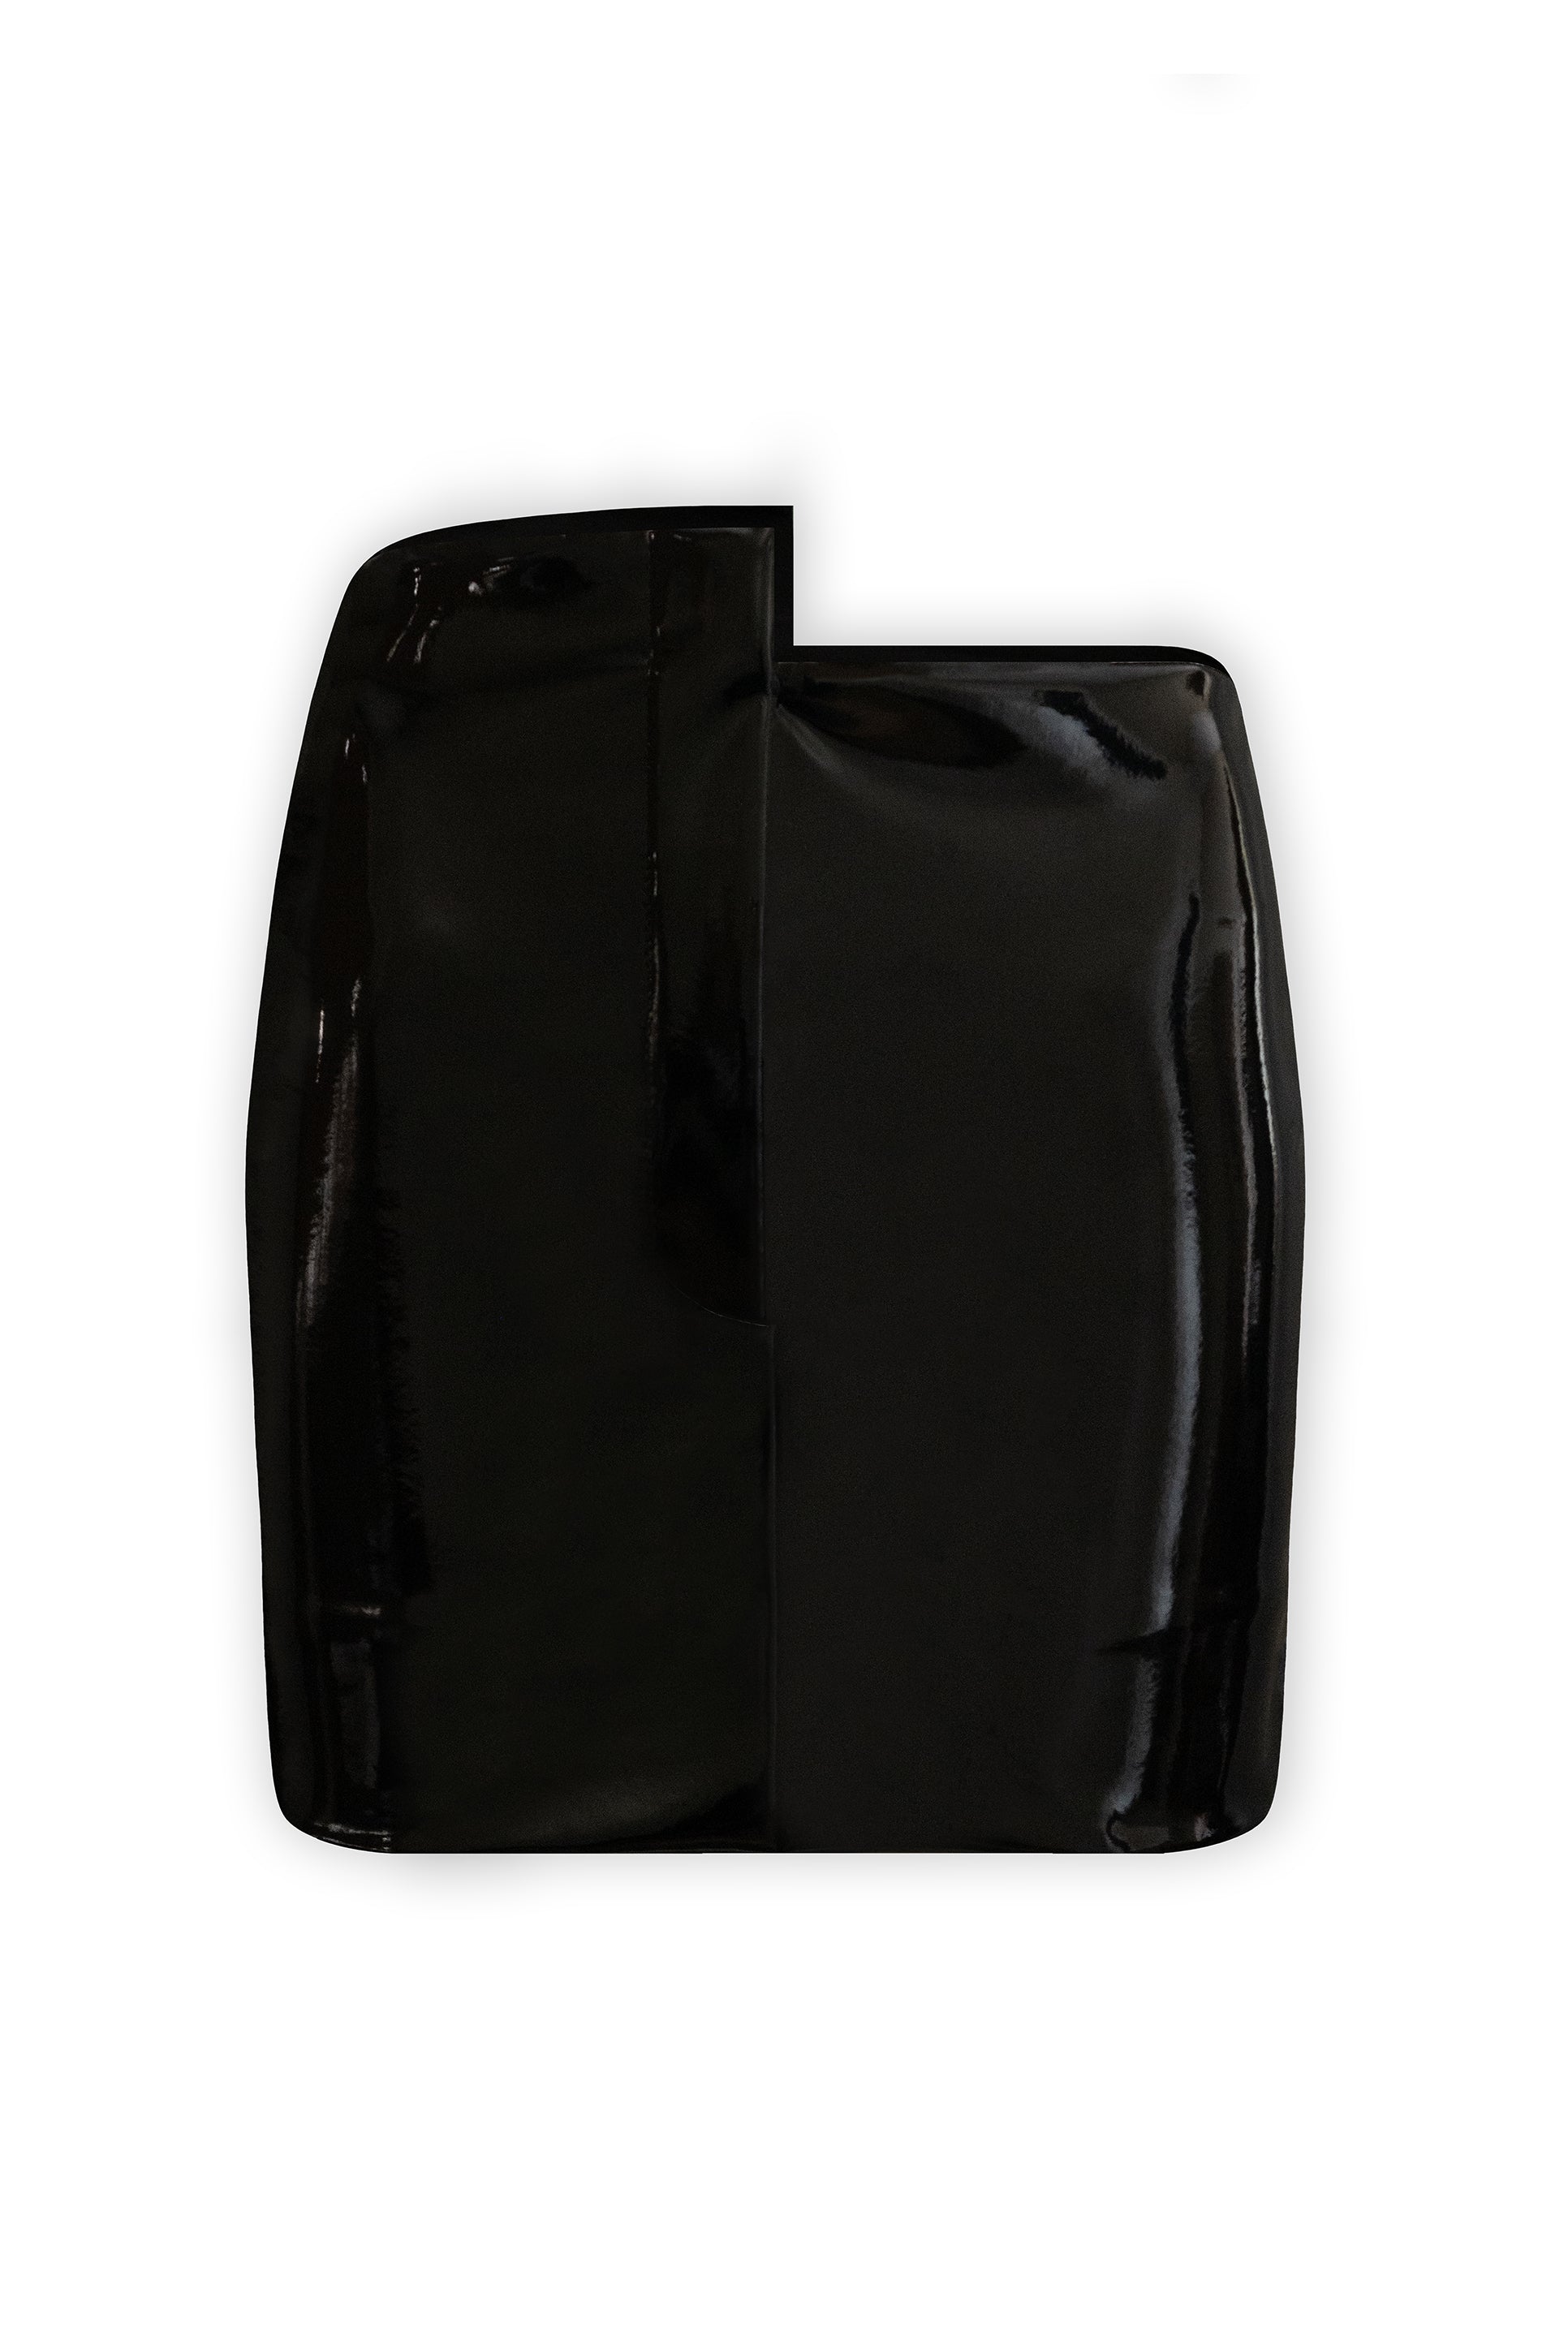 A black mini skirt with stepping on the waist, made from 100% eco leather and closed with soft lining. The skirt photograph is from the front on a white background.